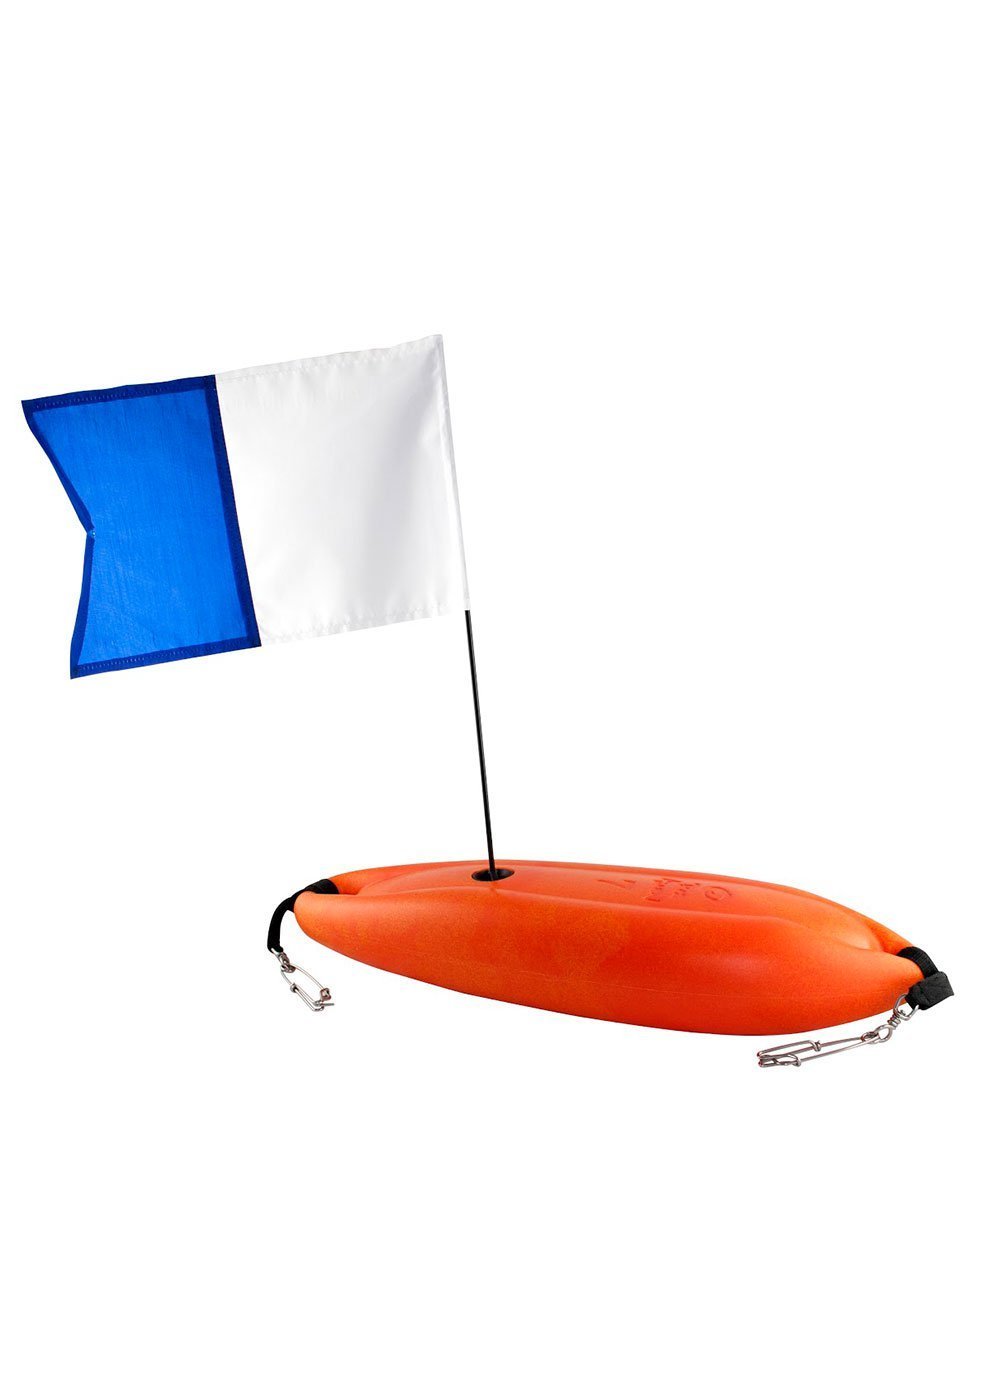 Orange Hard Float from Rob Allen of South Africa. The float comes with two shark clips and an "Alpha" dive flag on a plastic pole.